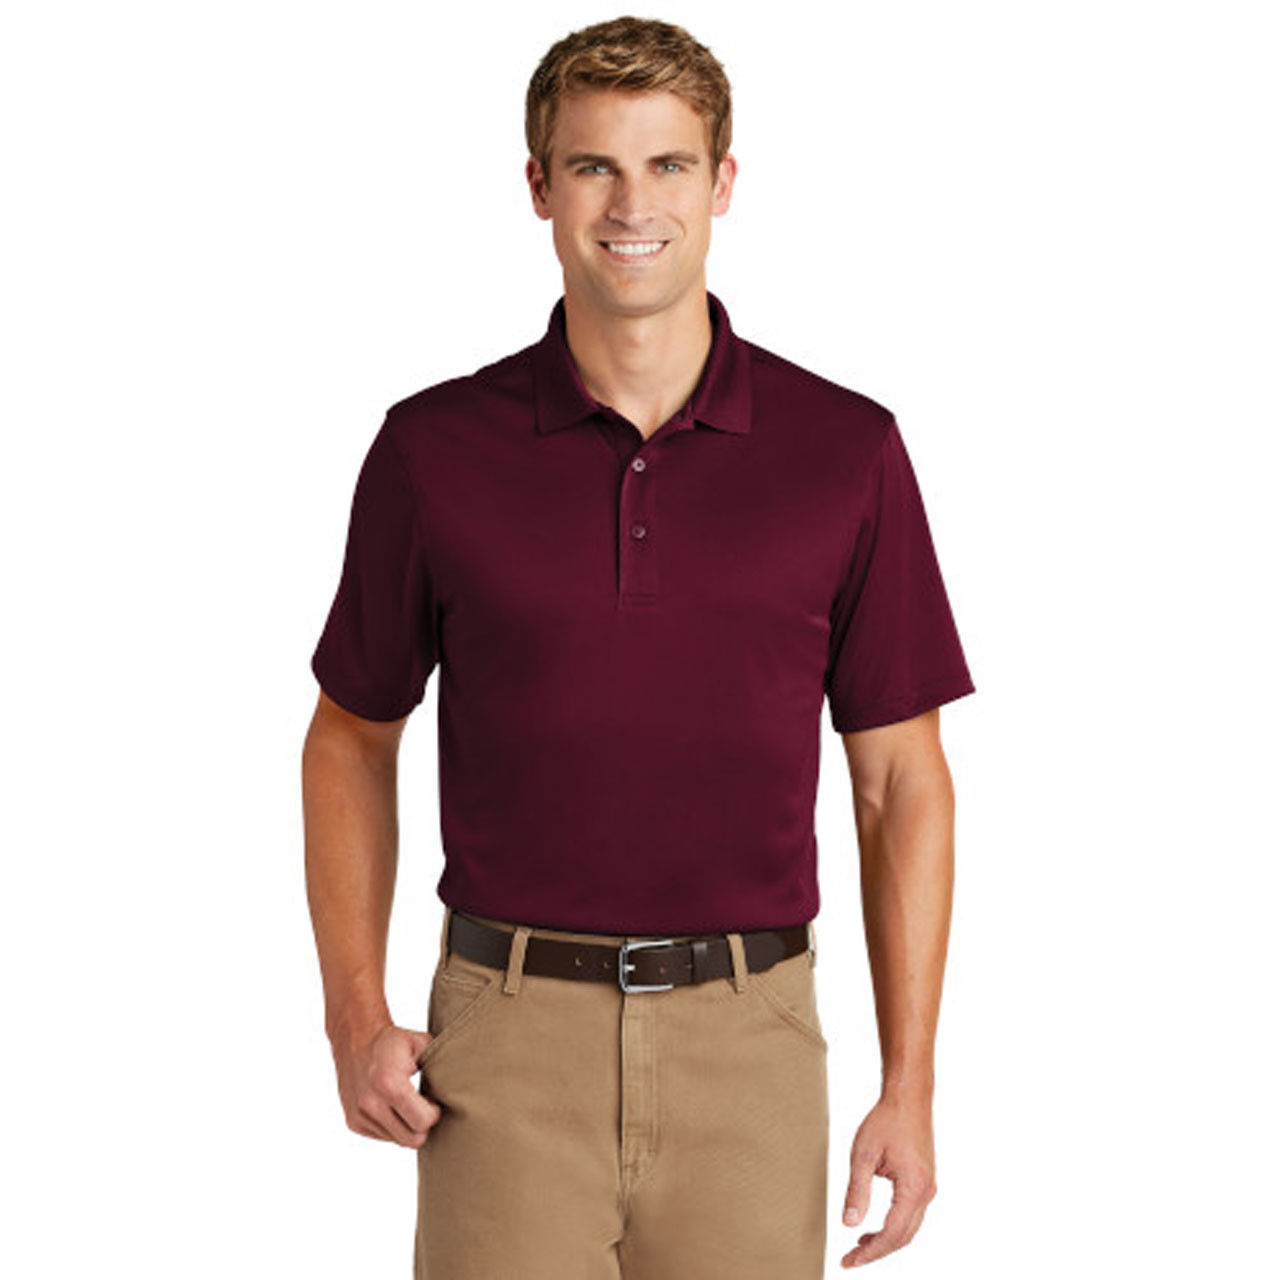 Wholesale Men's Snag-Proof Polo Shirt- Maroon CS412, Case of 36 Questions & Answers